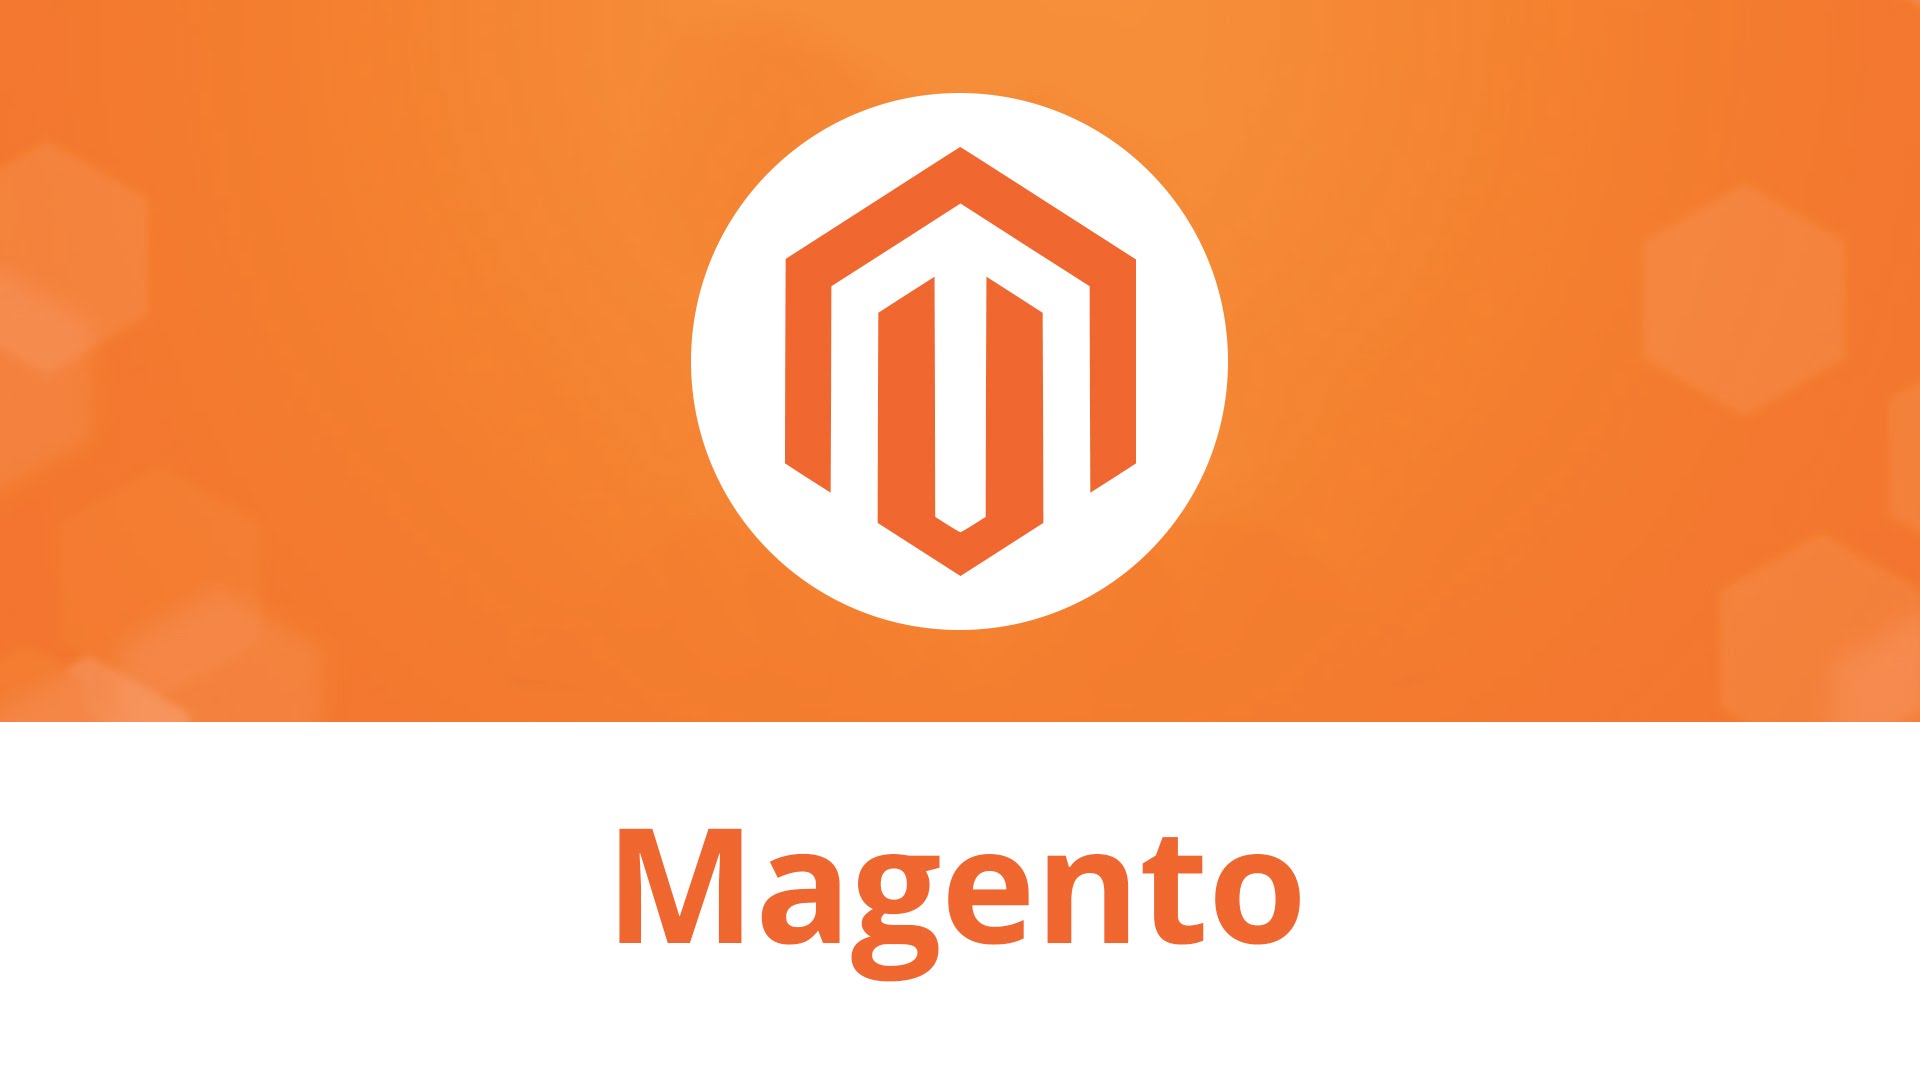 Magento is a technology stack used by big ecommerce companies, for that you should have at least a basic knowledge in web development